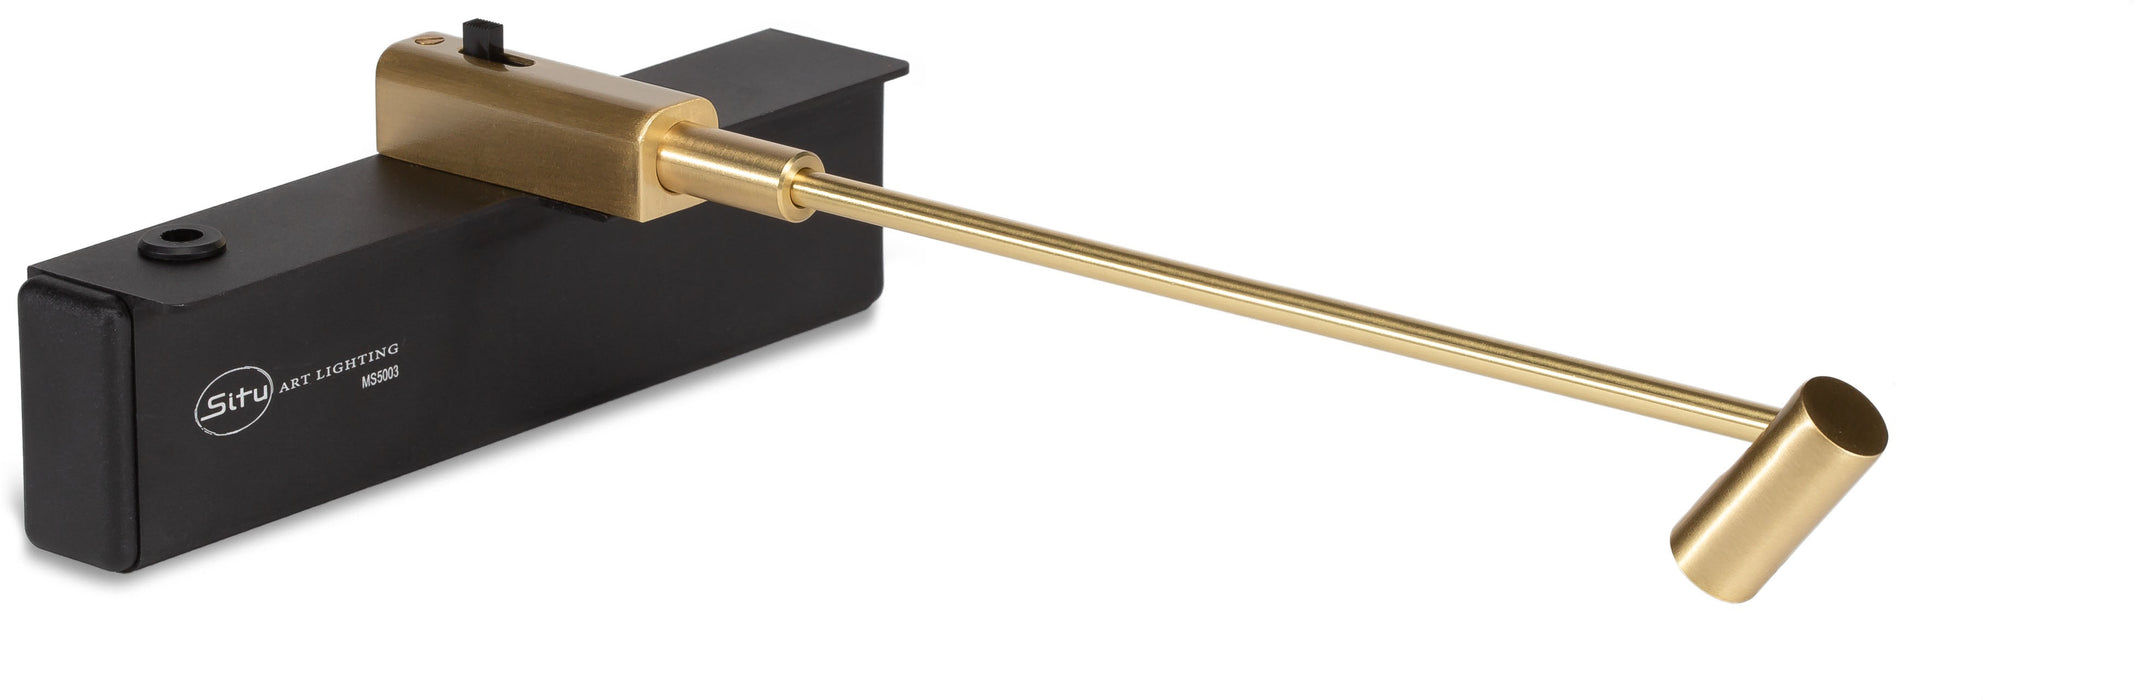 Brushed brass Micro Series LED light with an adjustable head, connected to a black R-MS battery pack.